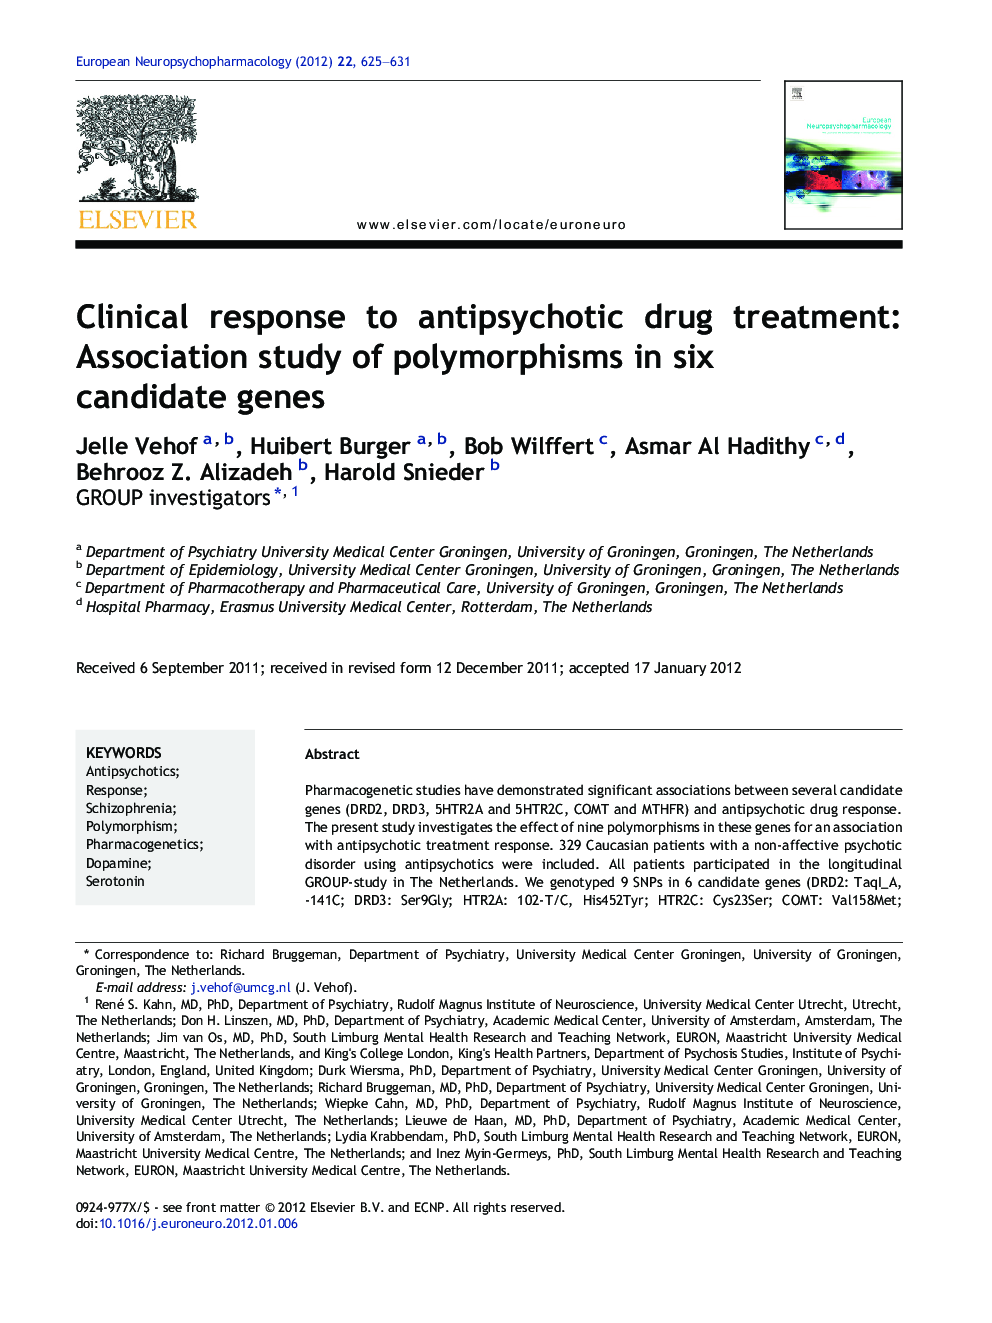 Clinical response to antipsychotic drug treatment: Association study of polymorphisms in six candidate genes